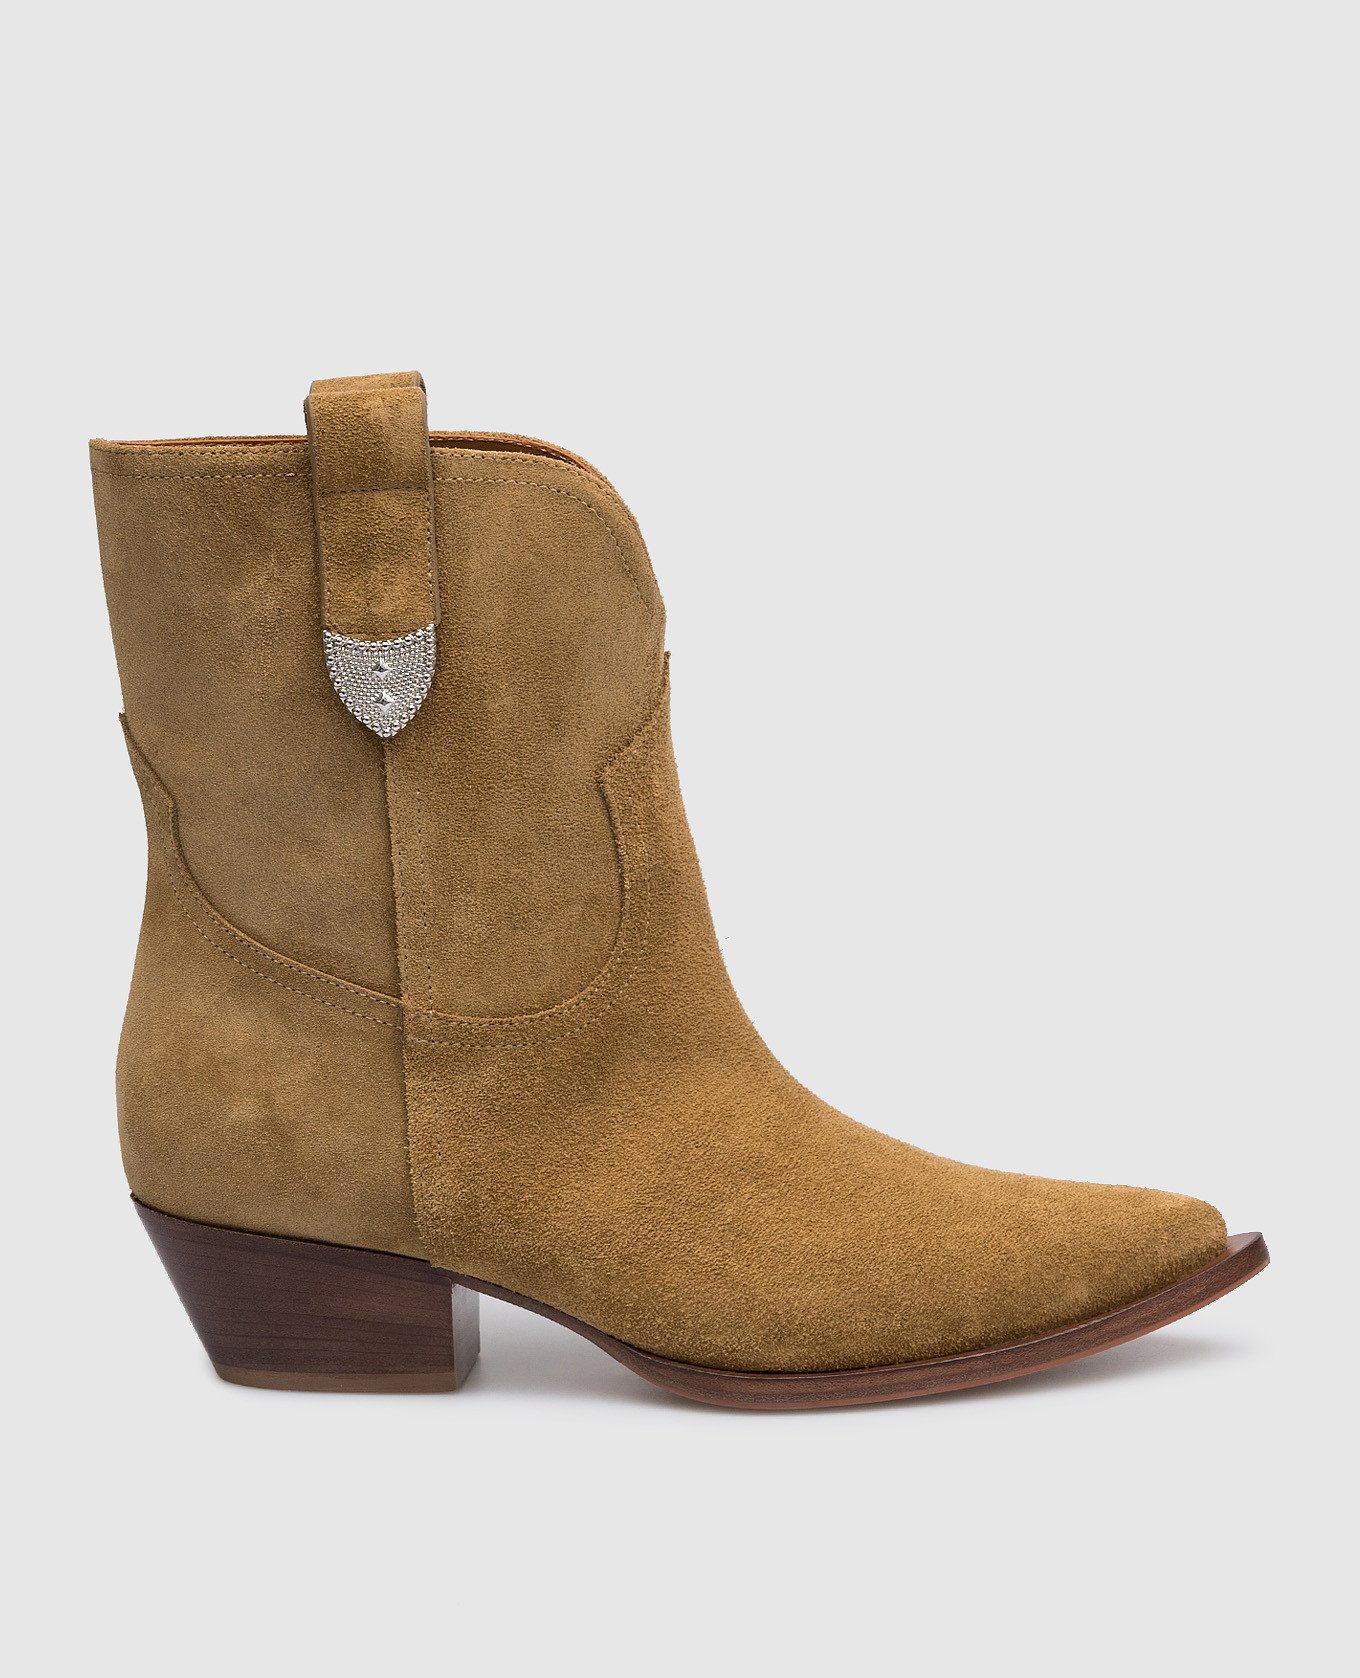 Paris brown suede boots with metal details